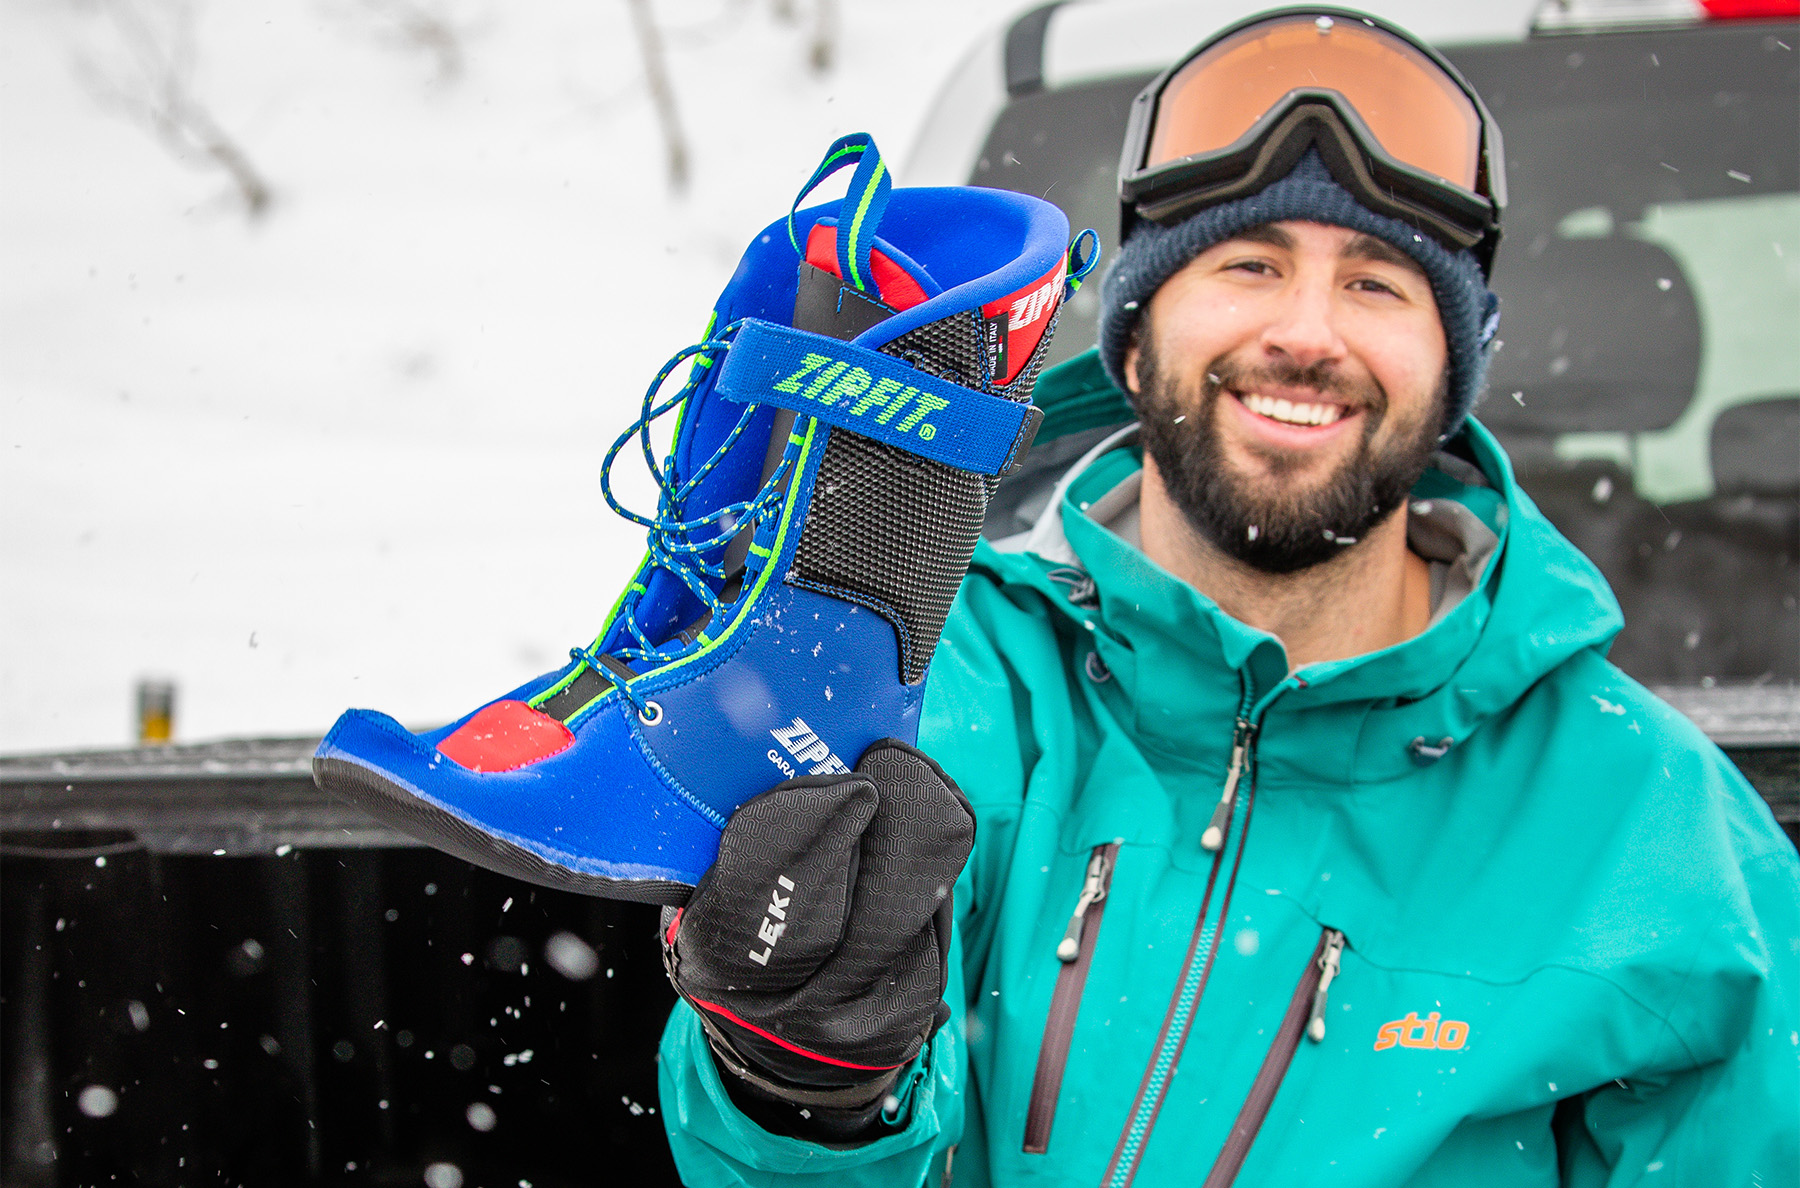 On GEAR:30, Jonathan Ellsworth and Kara Williard talk with Jeff Colt, Brand Director for ZipFit, about “inner boots”; first-day vs. 3rd-day fit; reviewing ski boots; the new Zipfit x Fischer Ski Boots collab; and more.